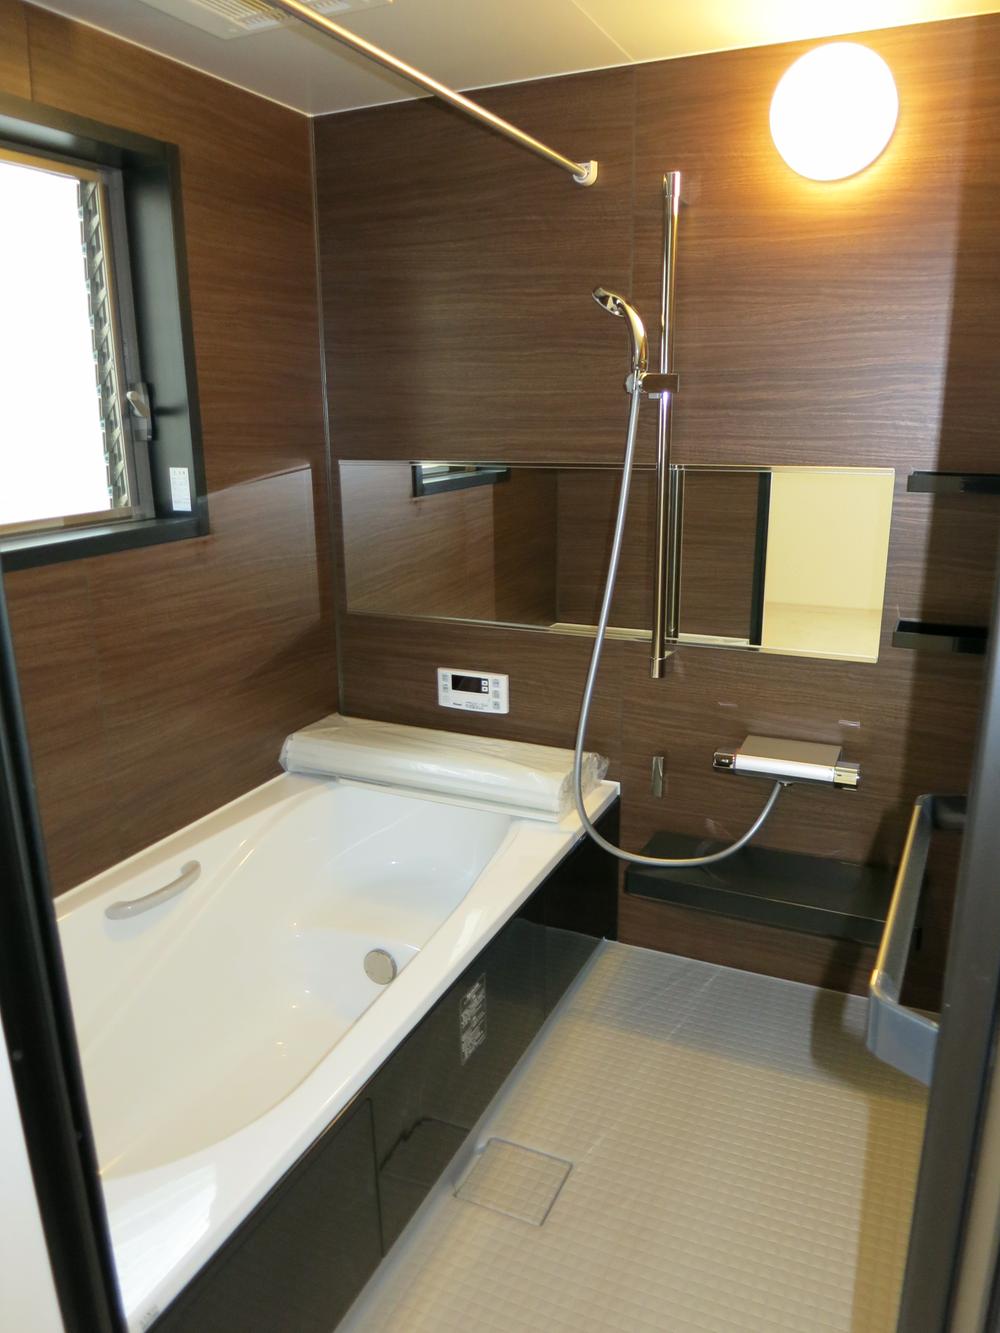 Bathroom.  ☆ Our construction cases ☆  ☆ Bathroom of 1 pyeong type ☆